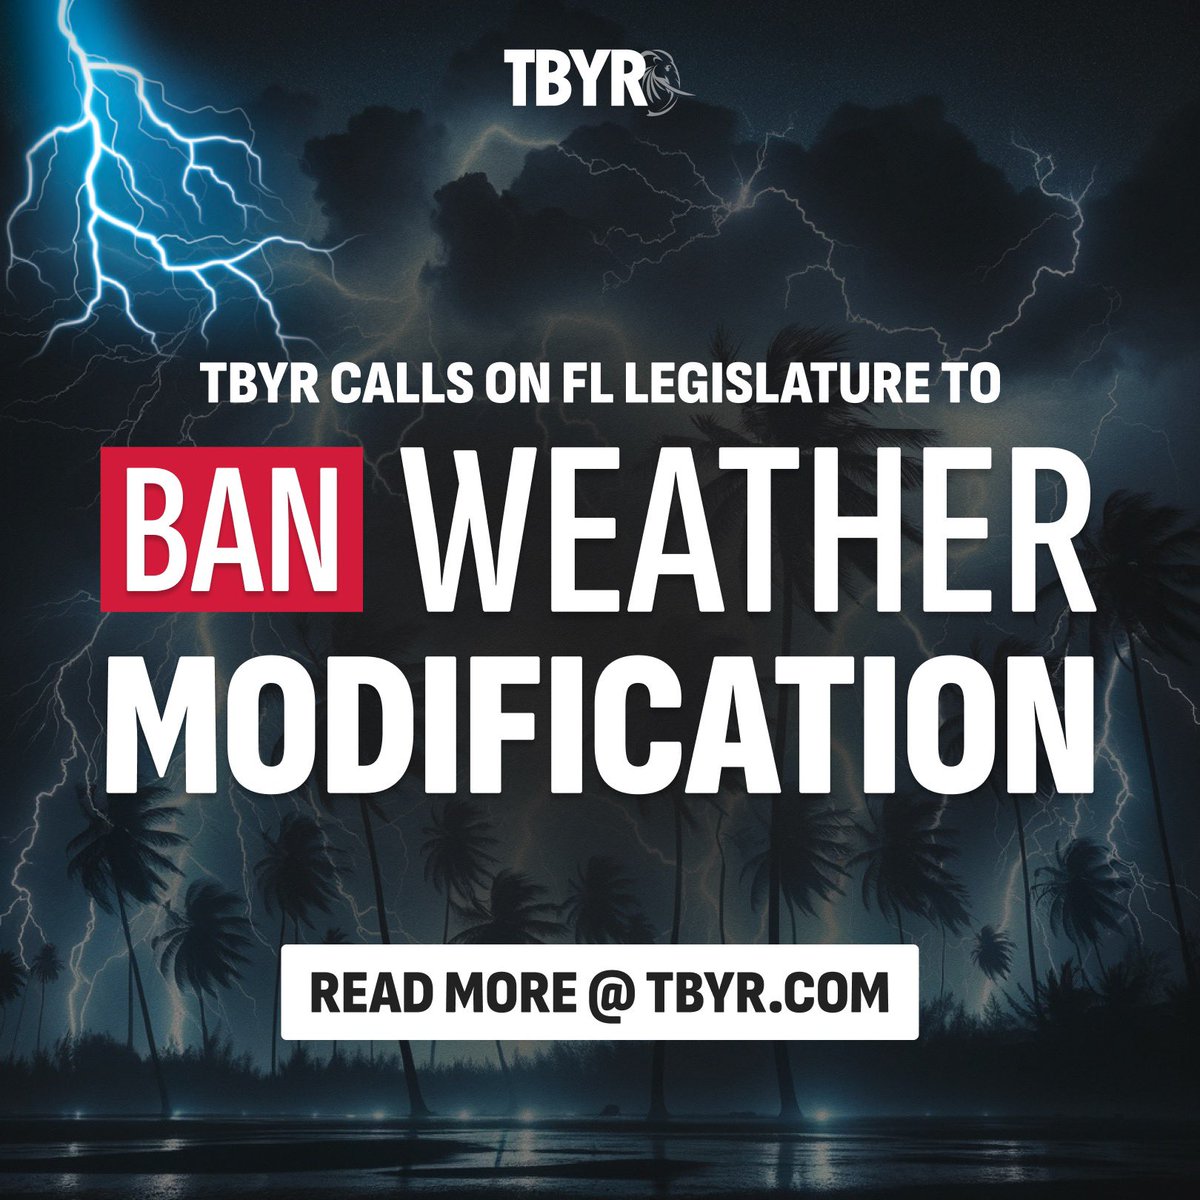 The TBYR is officially calling on the FL Legislature to Ban Weather Modification during it's next session. If you're interested, please contact your State Rep or Senator and ask that they support such a bill. Full bill: (tbyr.com/weathermod)